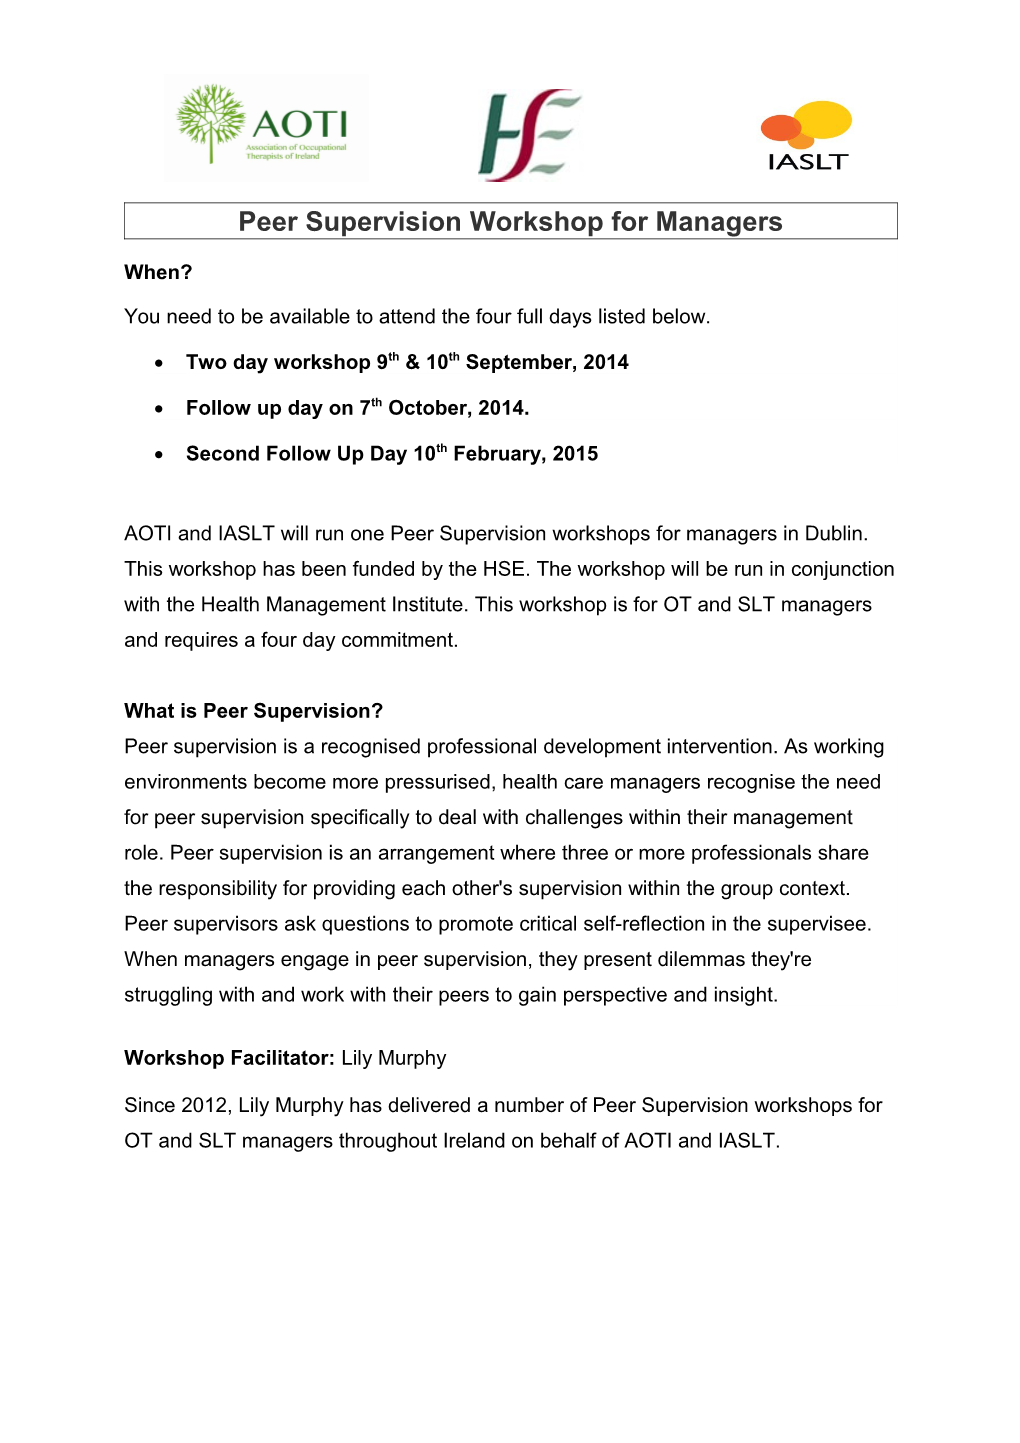 Peer Supervision Workshop for Managers